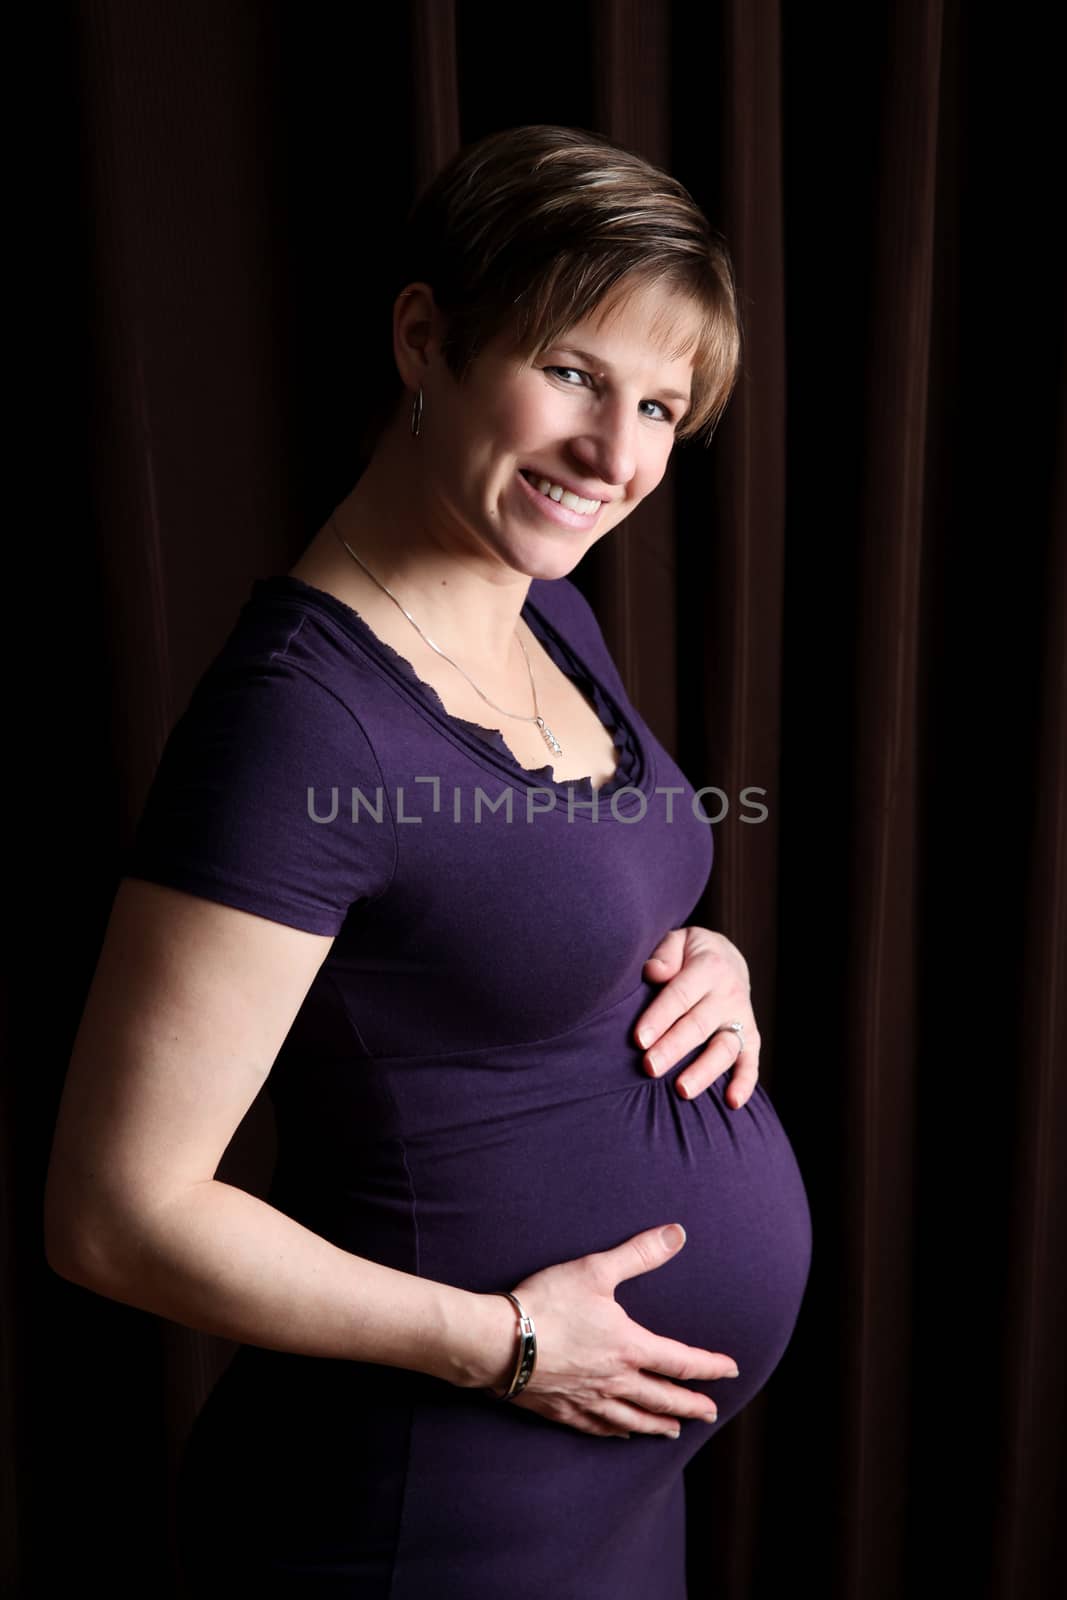 Pregnant woman against dark background with uneven lighting